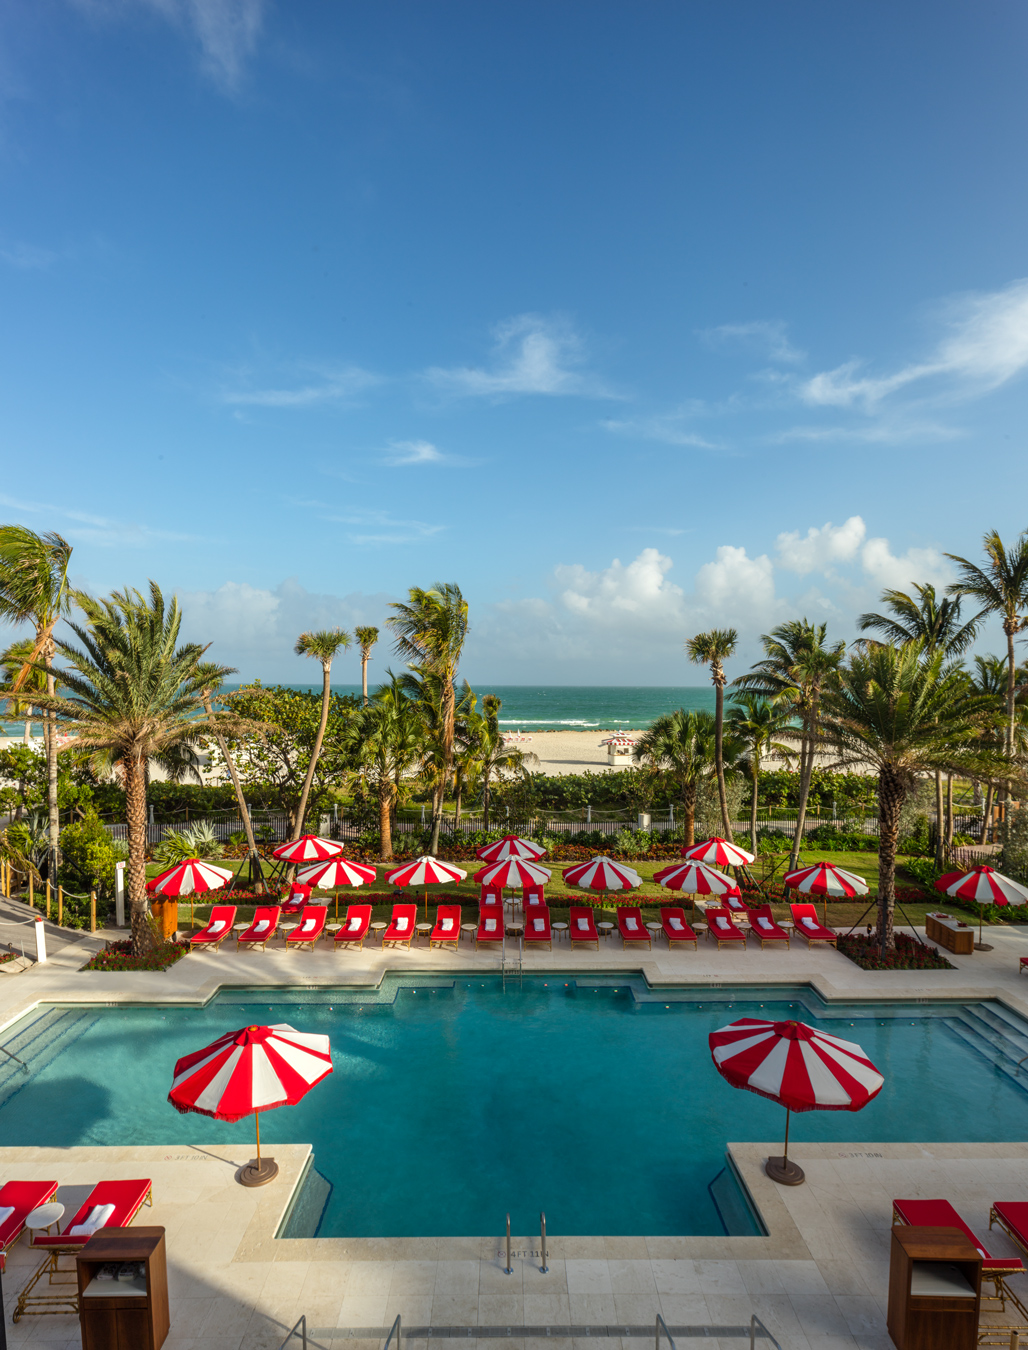 NUVO Summer 2016: The Faena District, Inquiring Minds